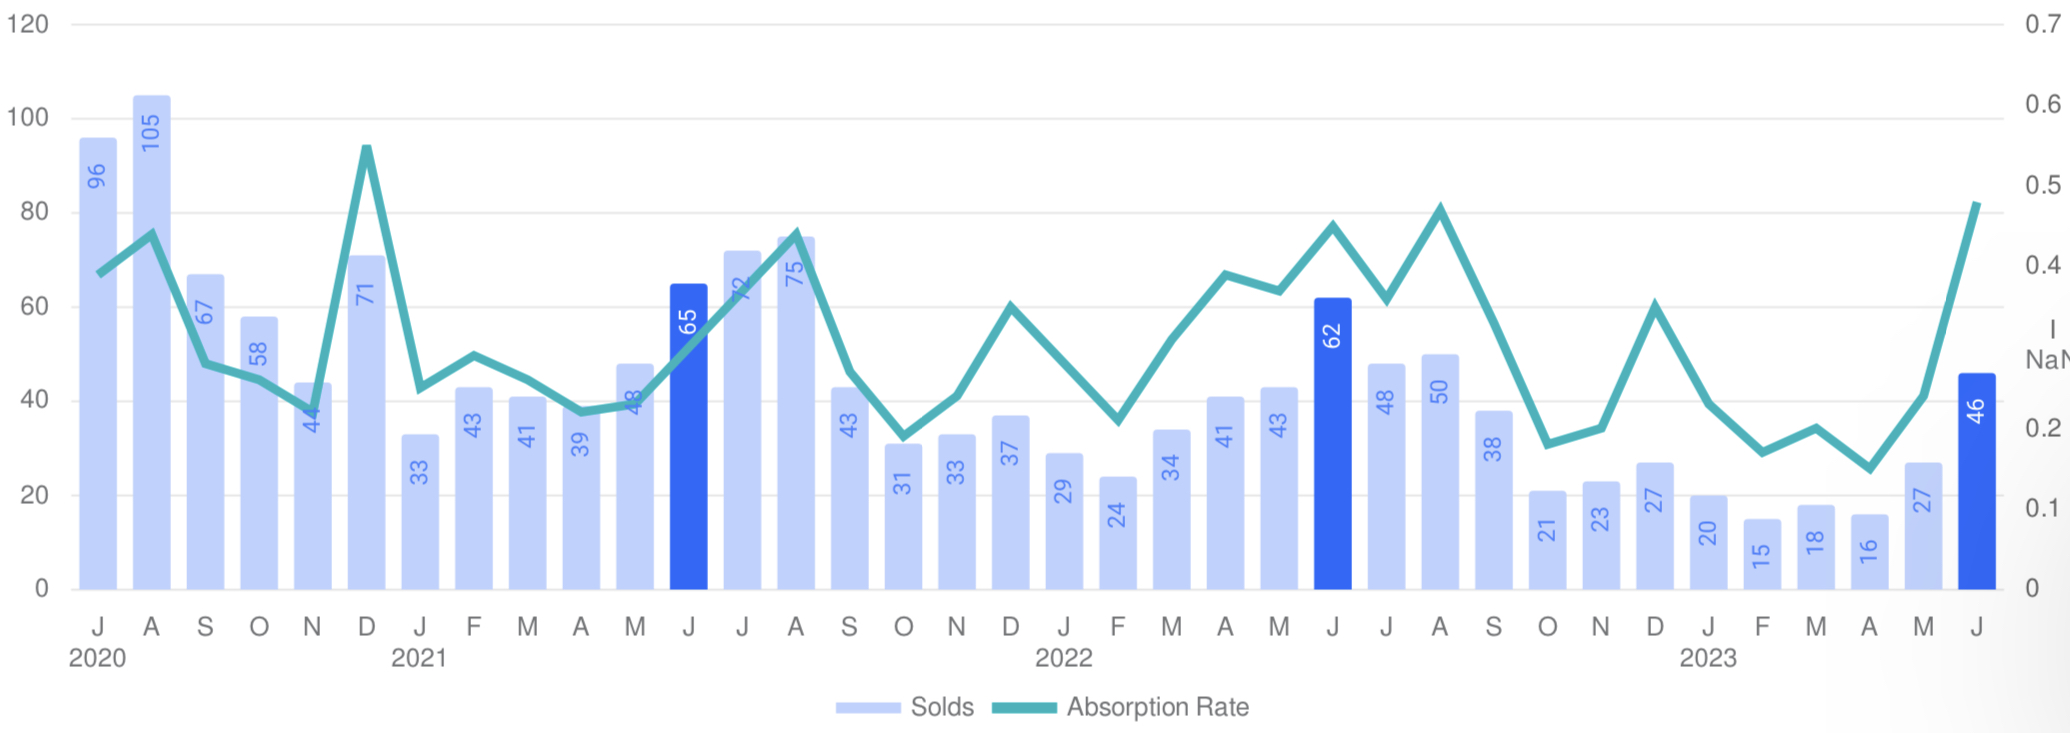 Graph of number of properties sold and absorption rate for Westport, CT homes